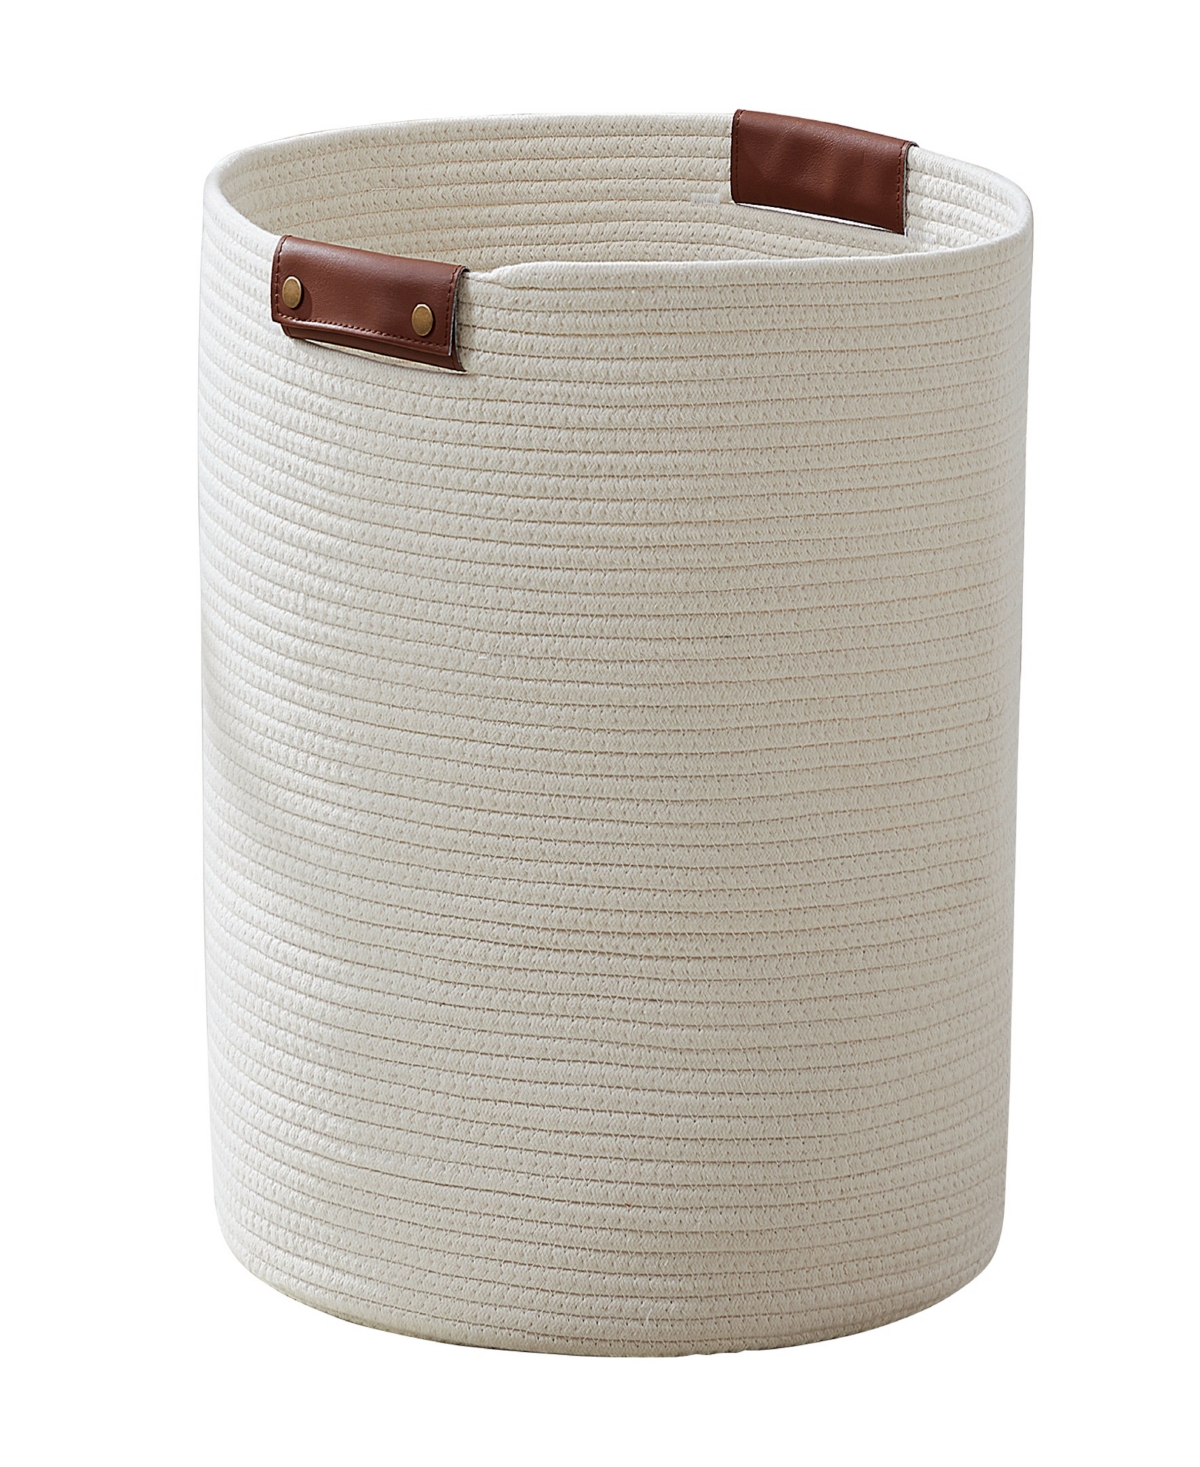 Large Cotton Rope Laundry Hamper Woven Basket with Leather Handles - Cream